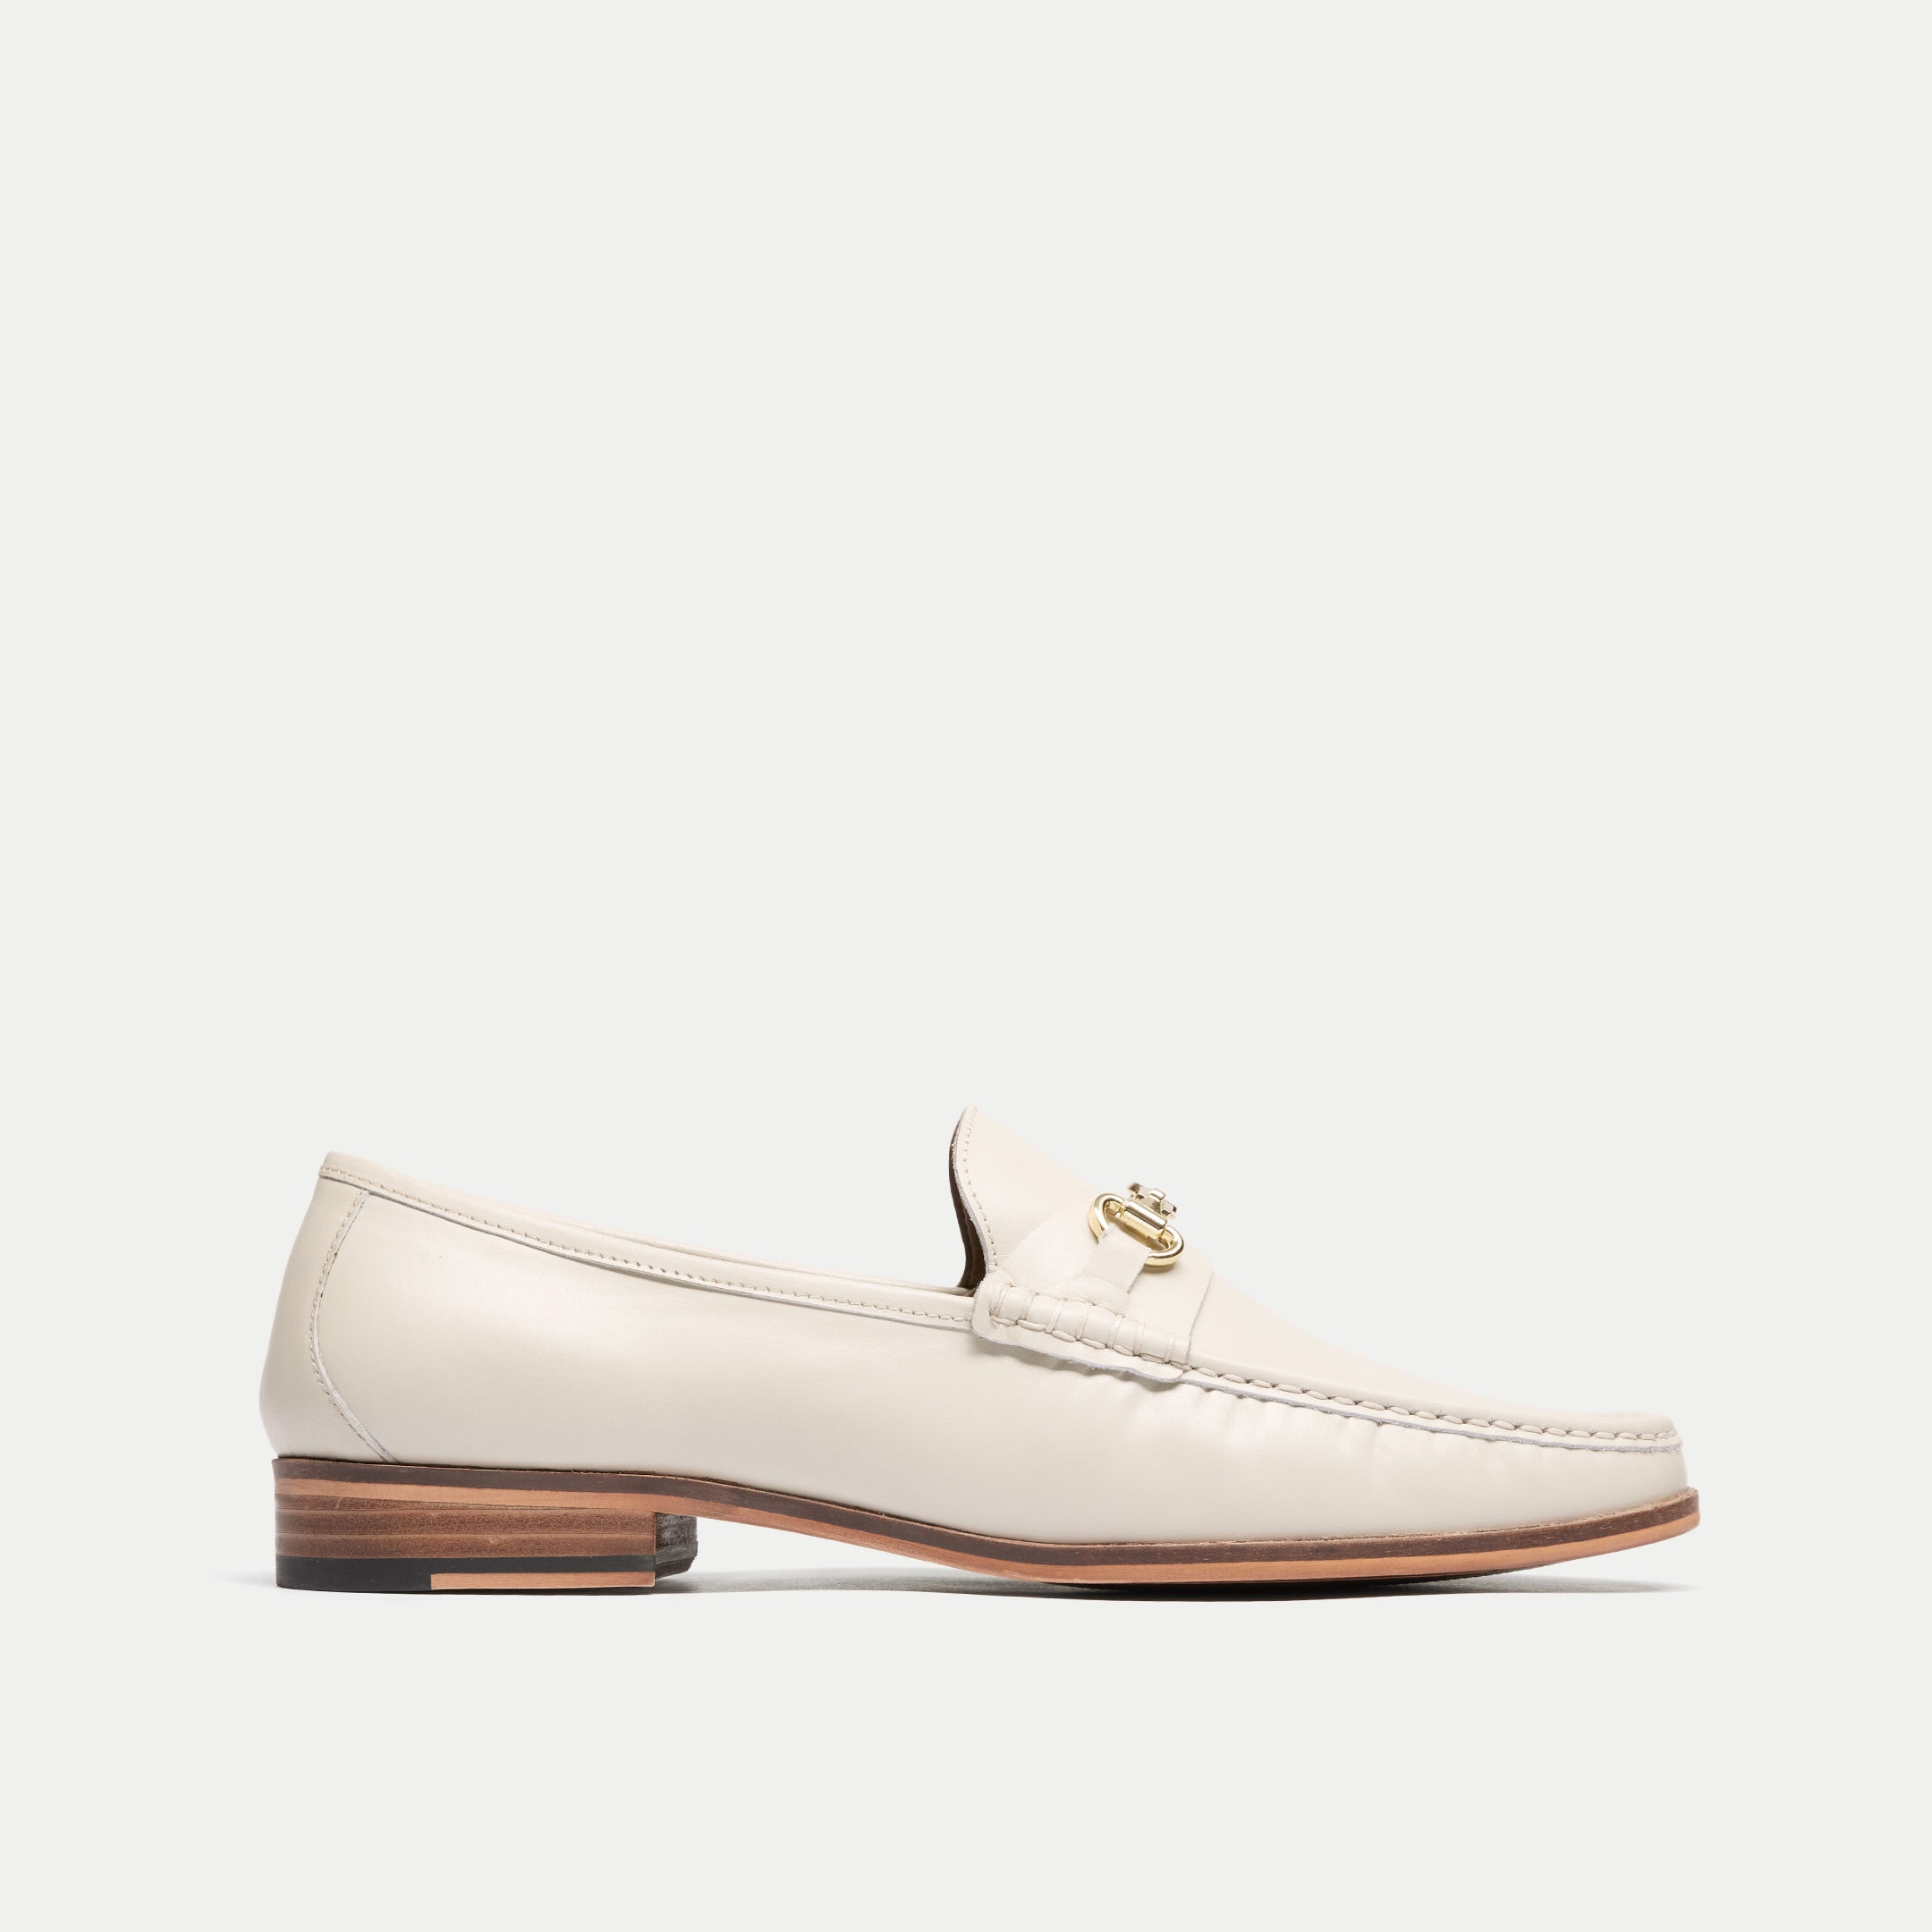 Walk London Mens Tino Trim Loafer in Off White Leather